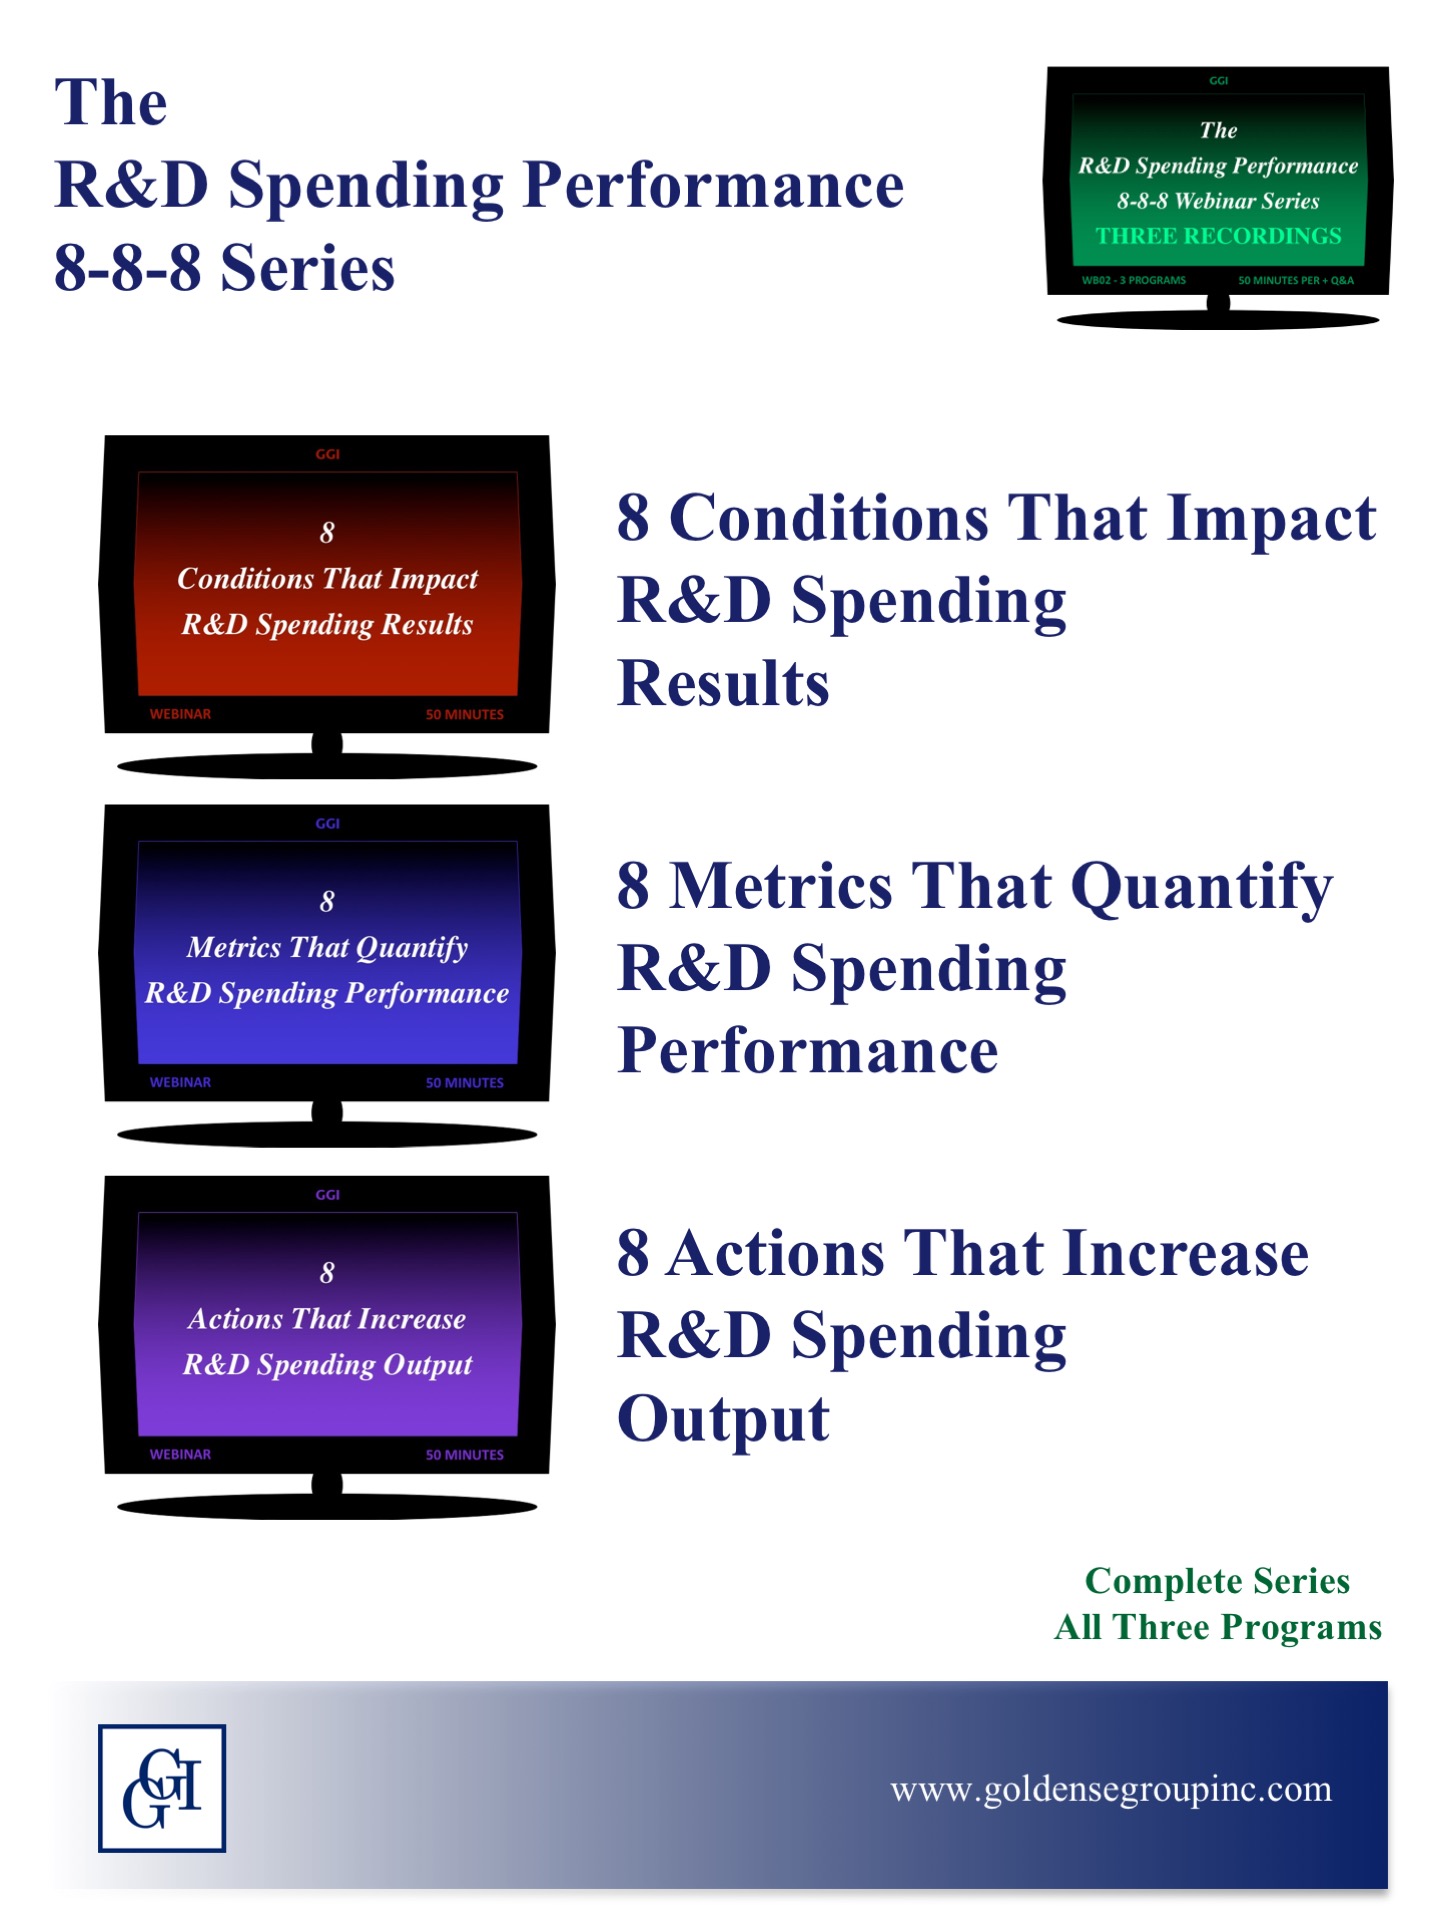 The R&D Spending Performance 8-8-8 Series